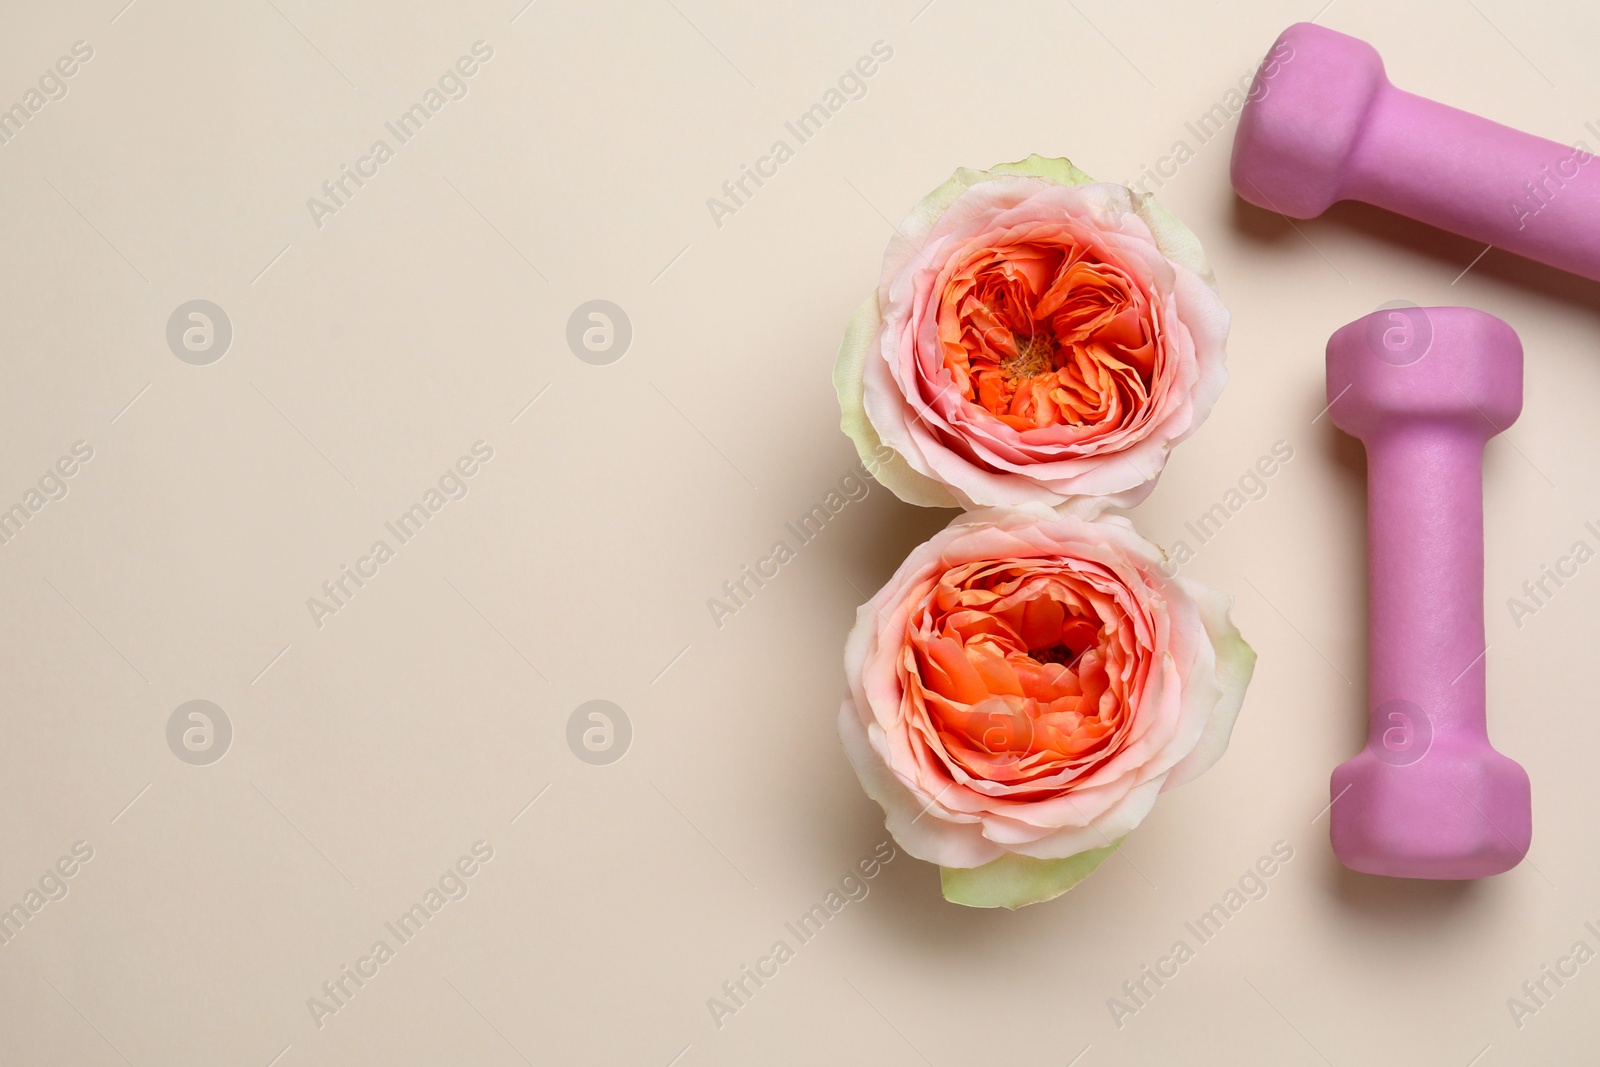 Photo of 8 March greeting card design with roses, dumbbells and space for text on beige background, flat lay. International Women's day